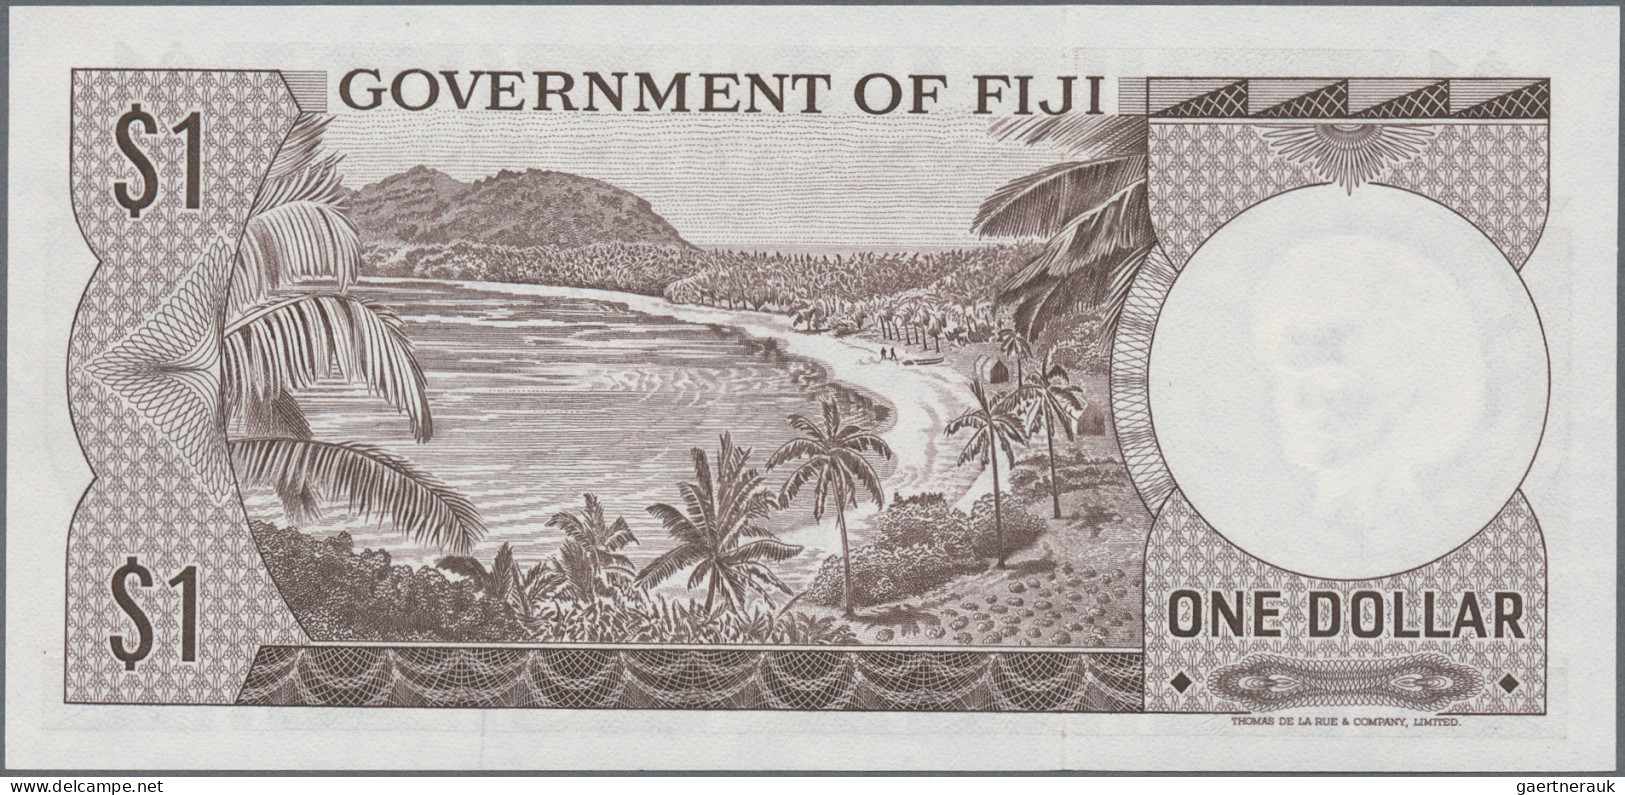 Fiji - Bank notes: Government of Fiji, lot with 7 banknotes, series 1968-1974, w